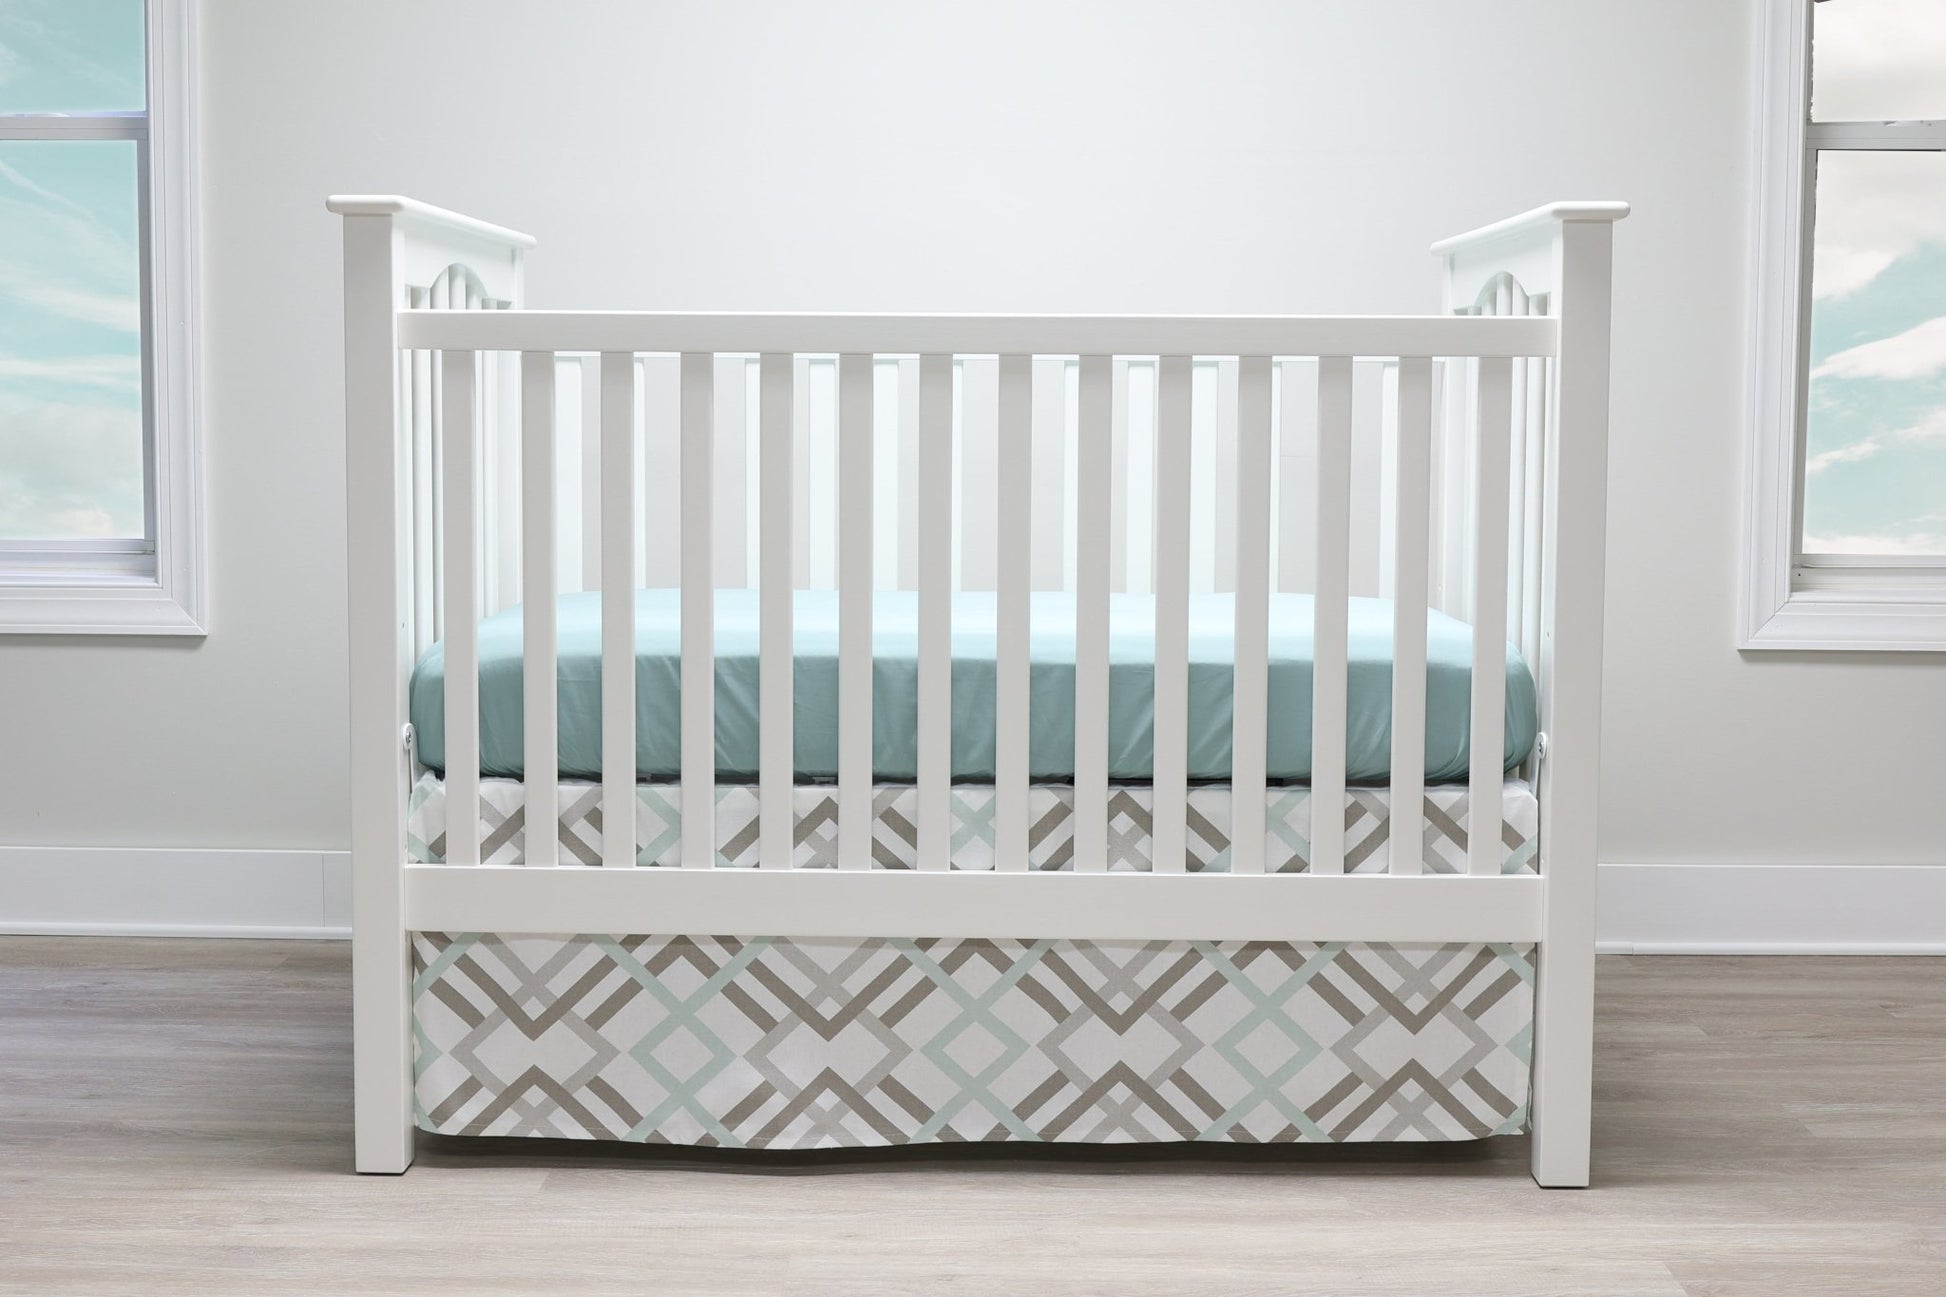 Robins Egg and Taupe Geometric Crib Bedding - 2 Piece Set - New Arrivals Inc